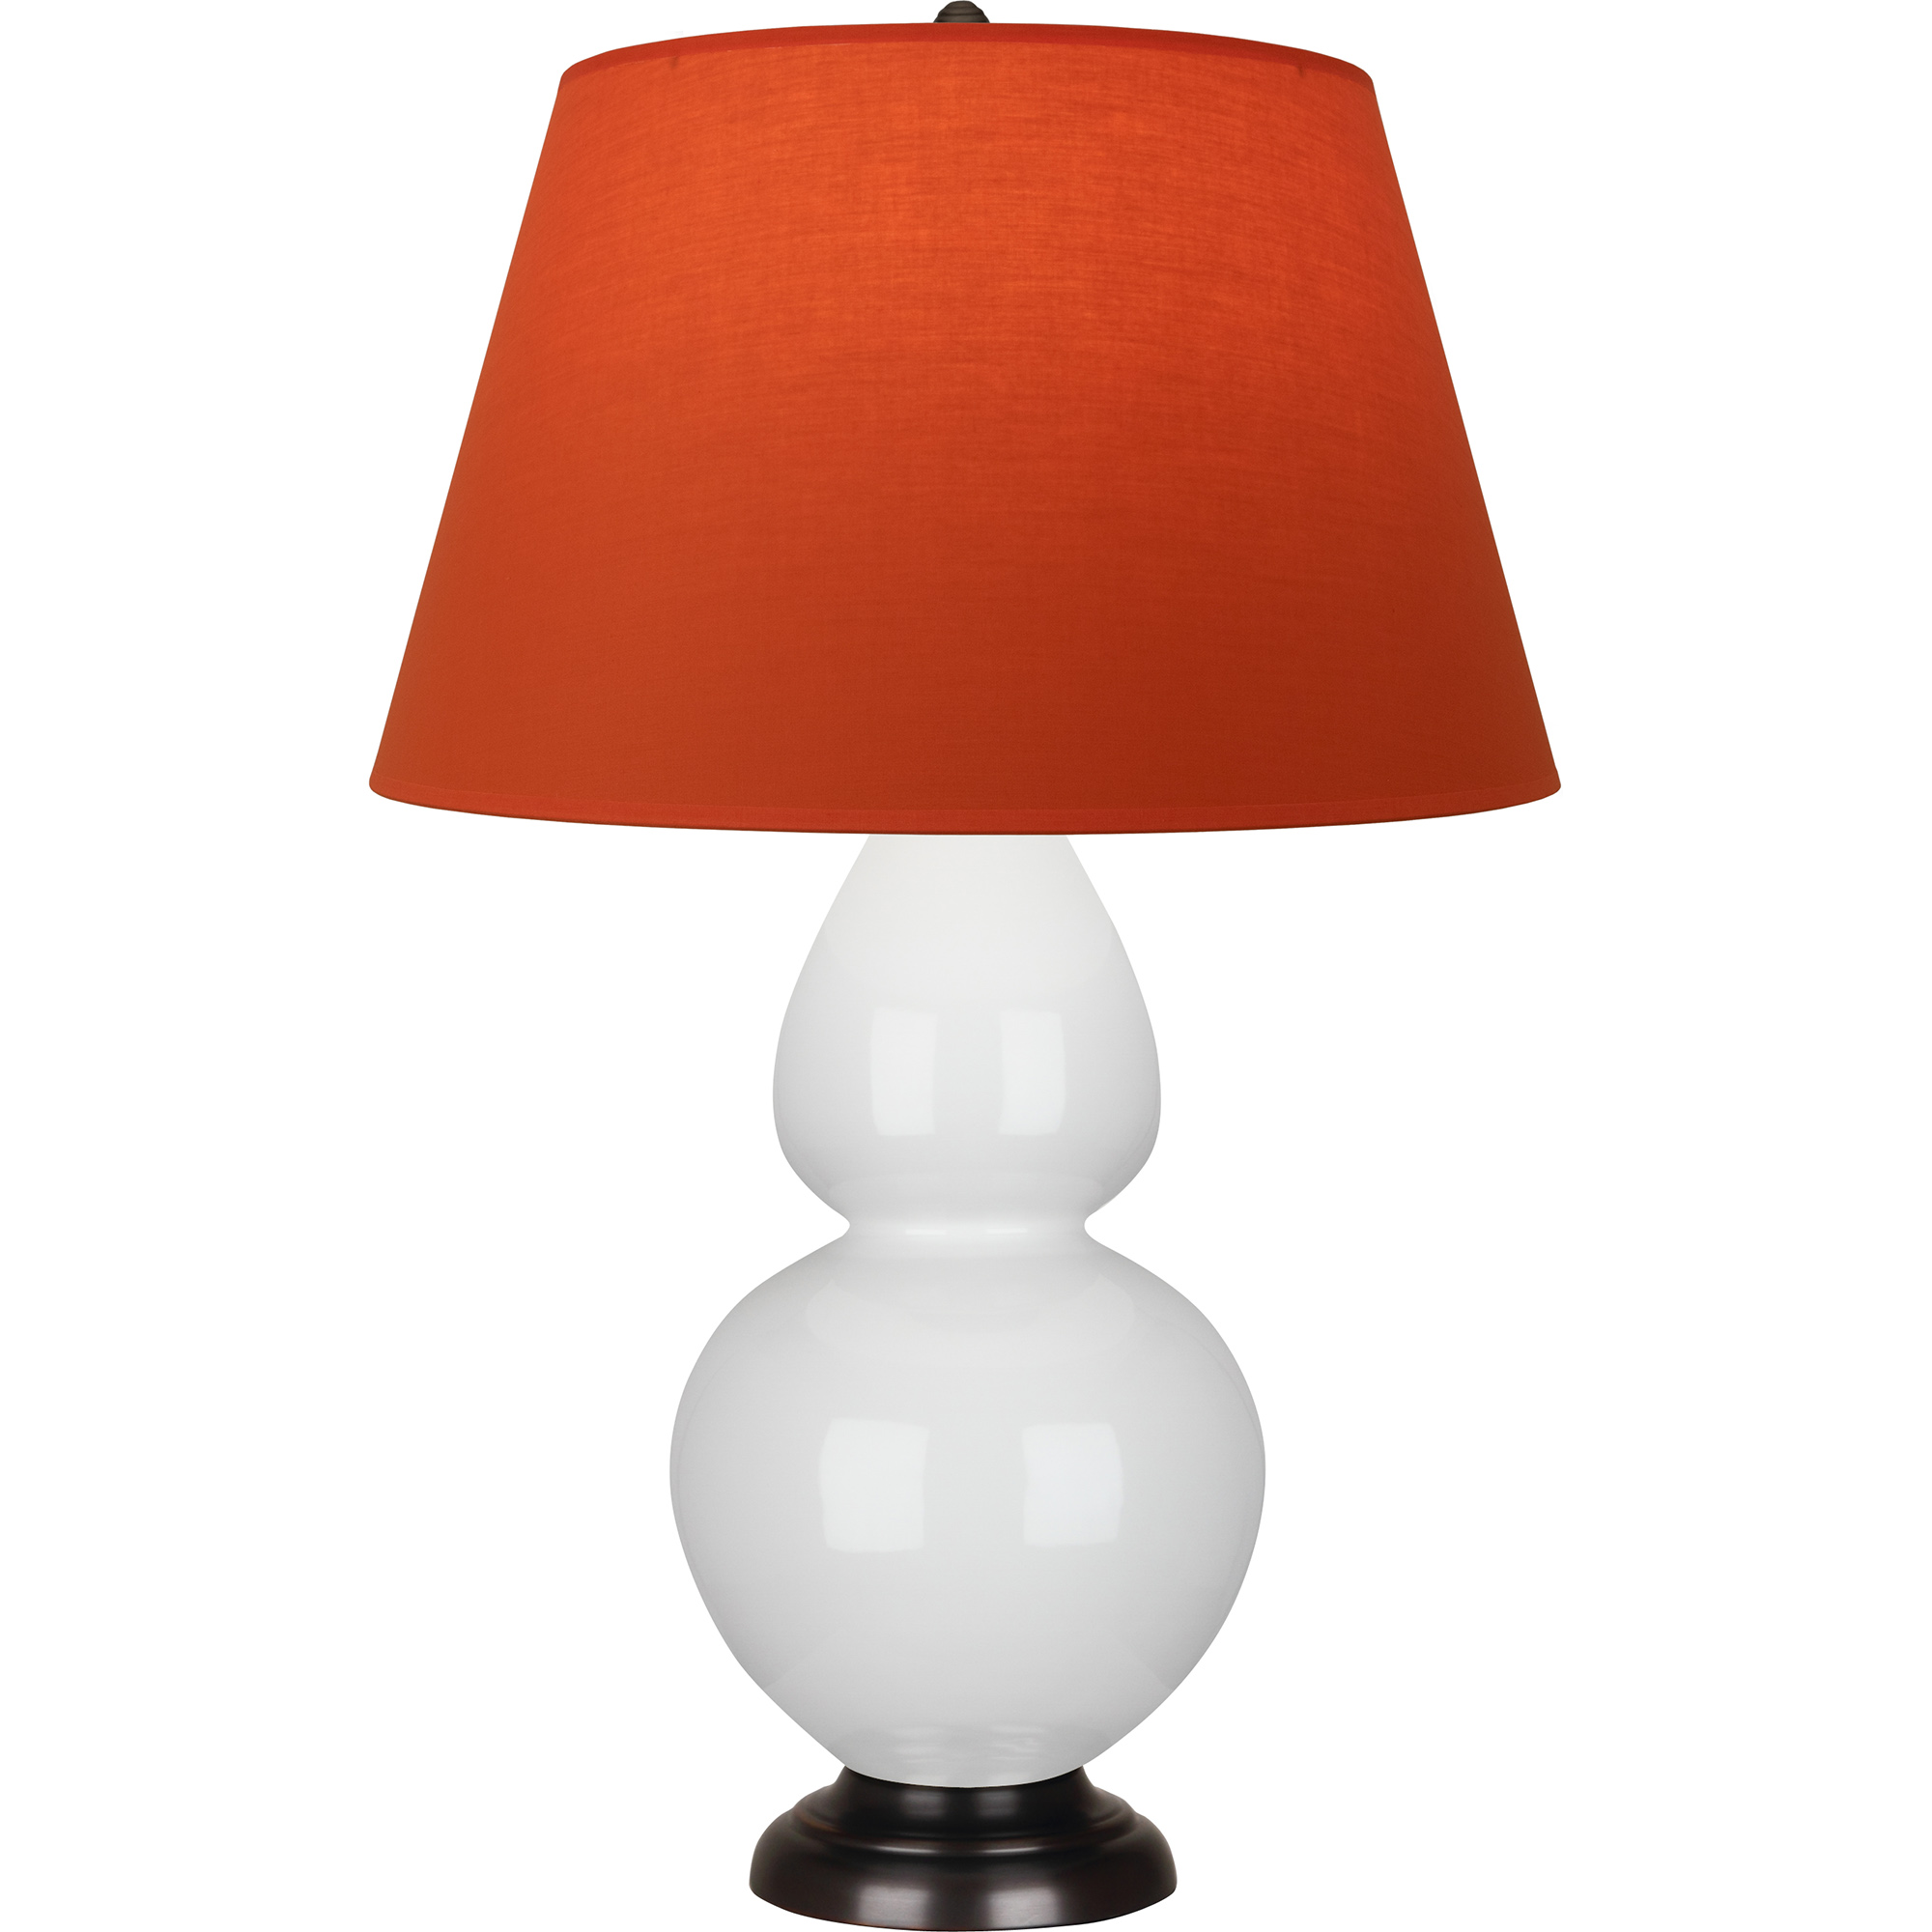 Double Gourd Table Lamp Style #1640T